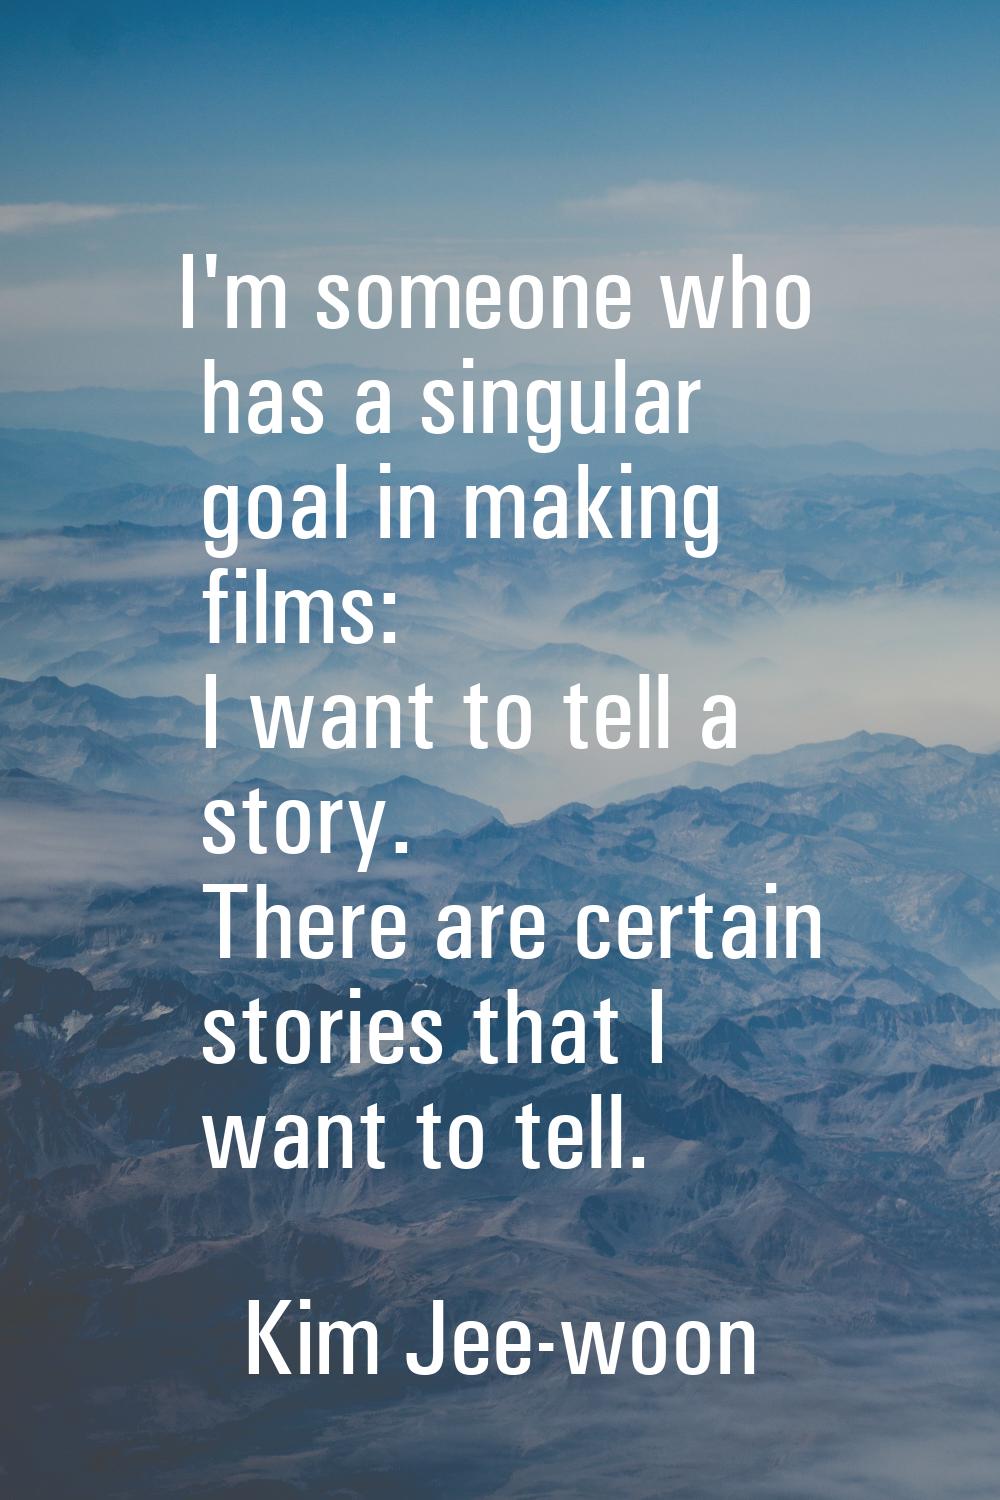 I'm someone who has a singular goal in making films: I want to tell a story. There are certain stor